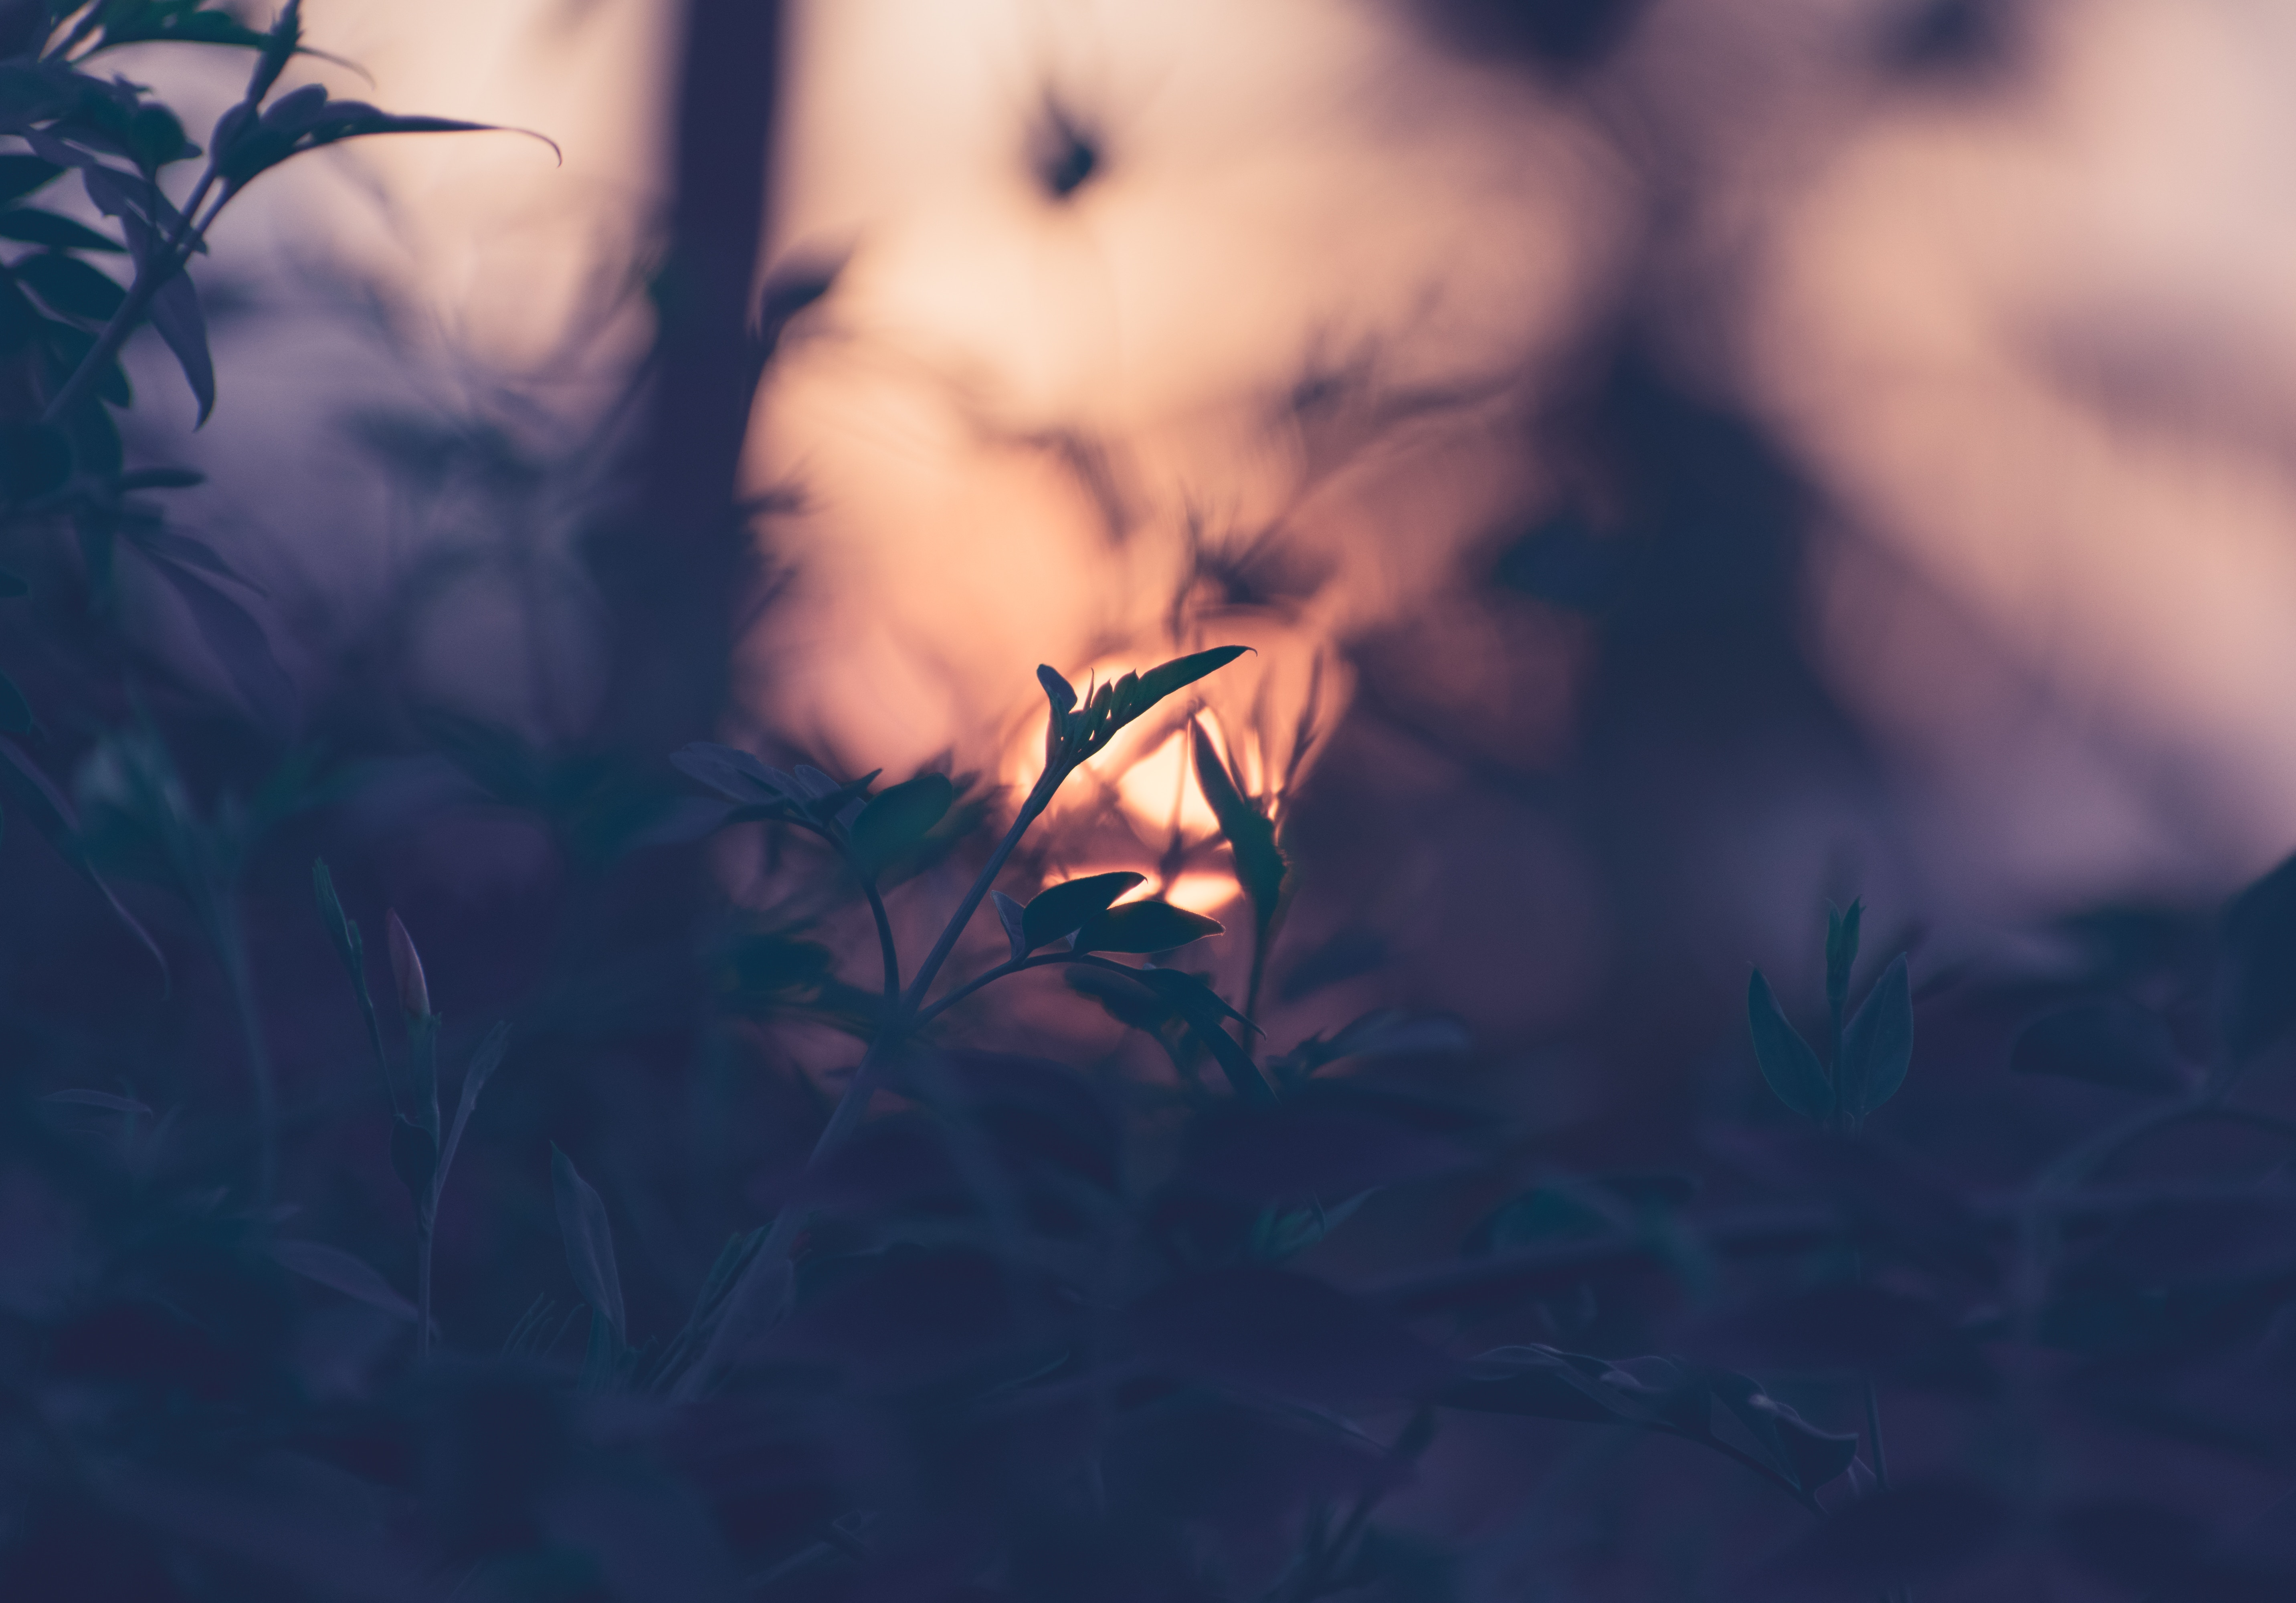 smooth, sunset, leaves, plant, macro, blur, branches lock screen backgrounds